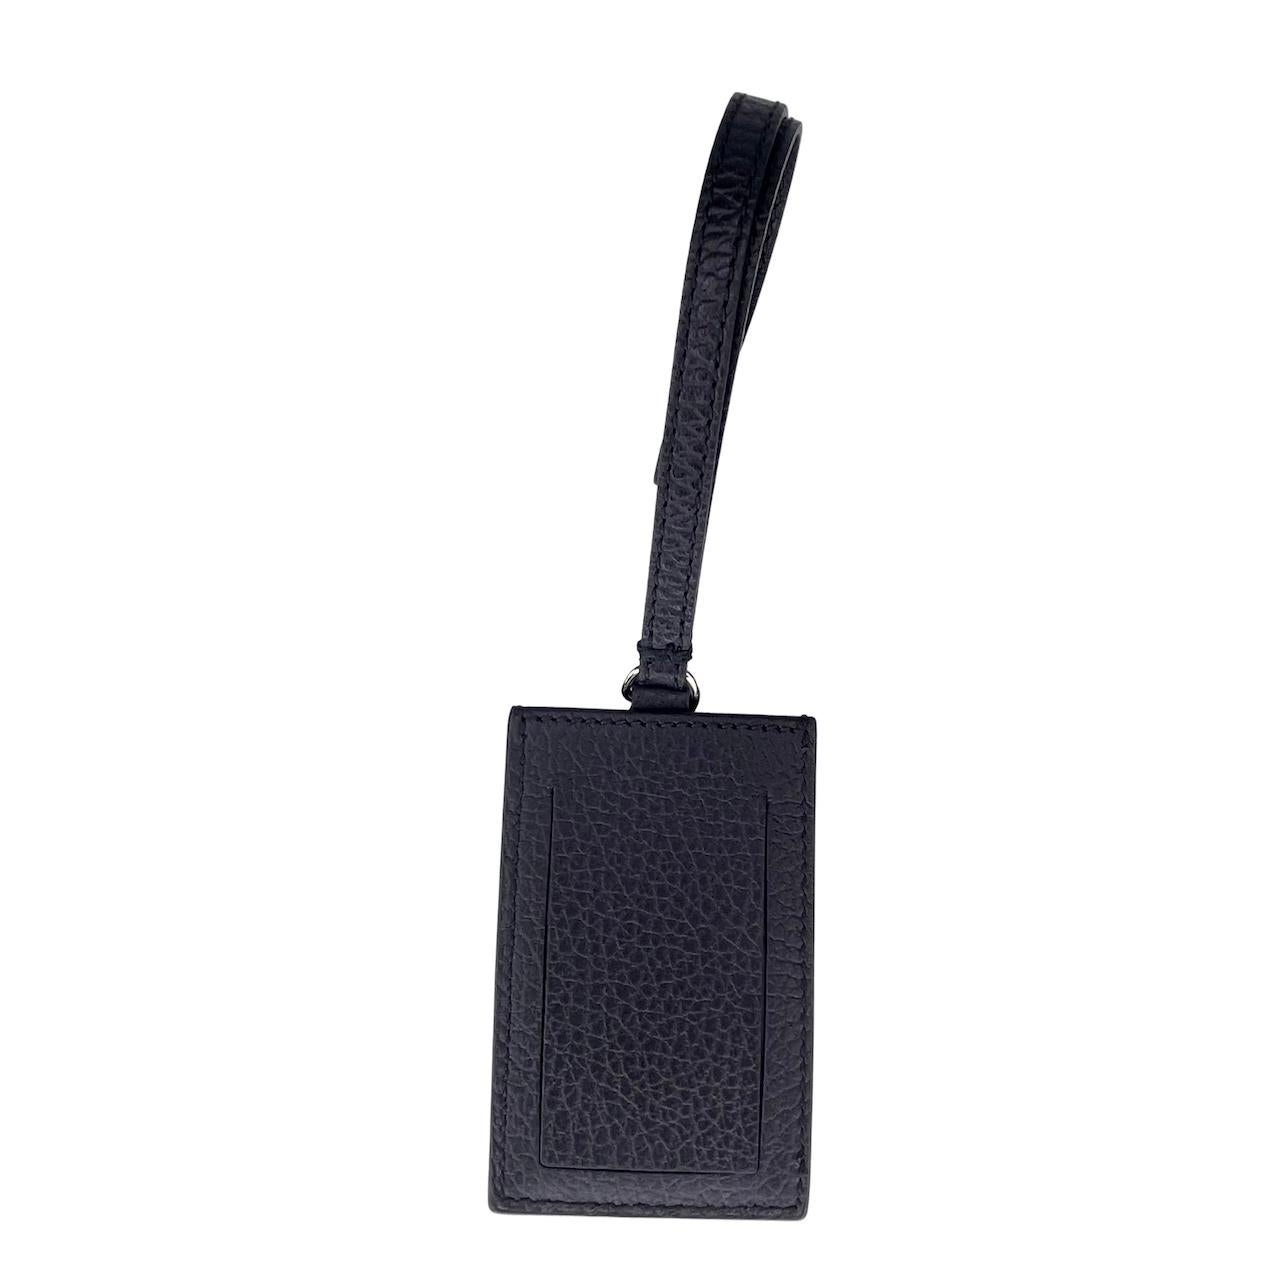 Gucci Interlocking G leather luggage tag, in black. Made of Calfskin leather with a silvered metal logo engraved.

COLOR: Black
MATERIAL: Calfskin leather
MEASURES: W 2.1” x H 3.4”
DROP: 7”
COMES WITH: Gucci box
CONDITION: Excellent - no evidence of